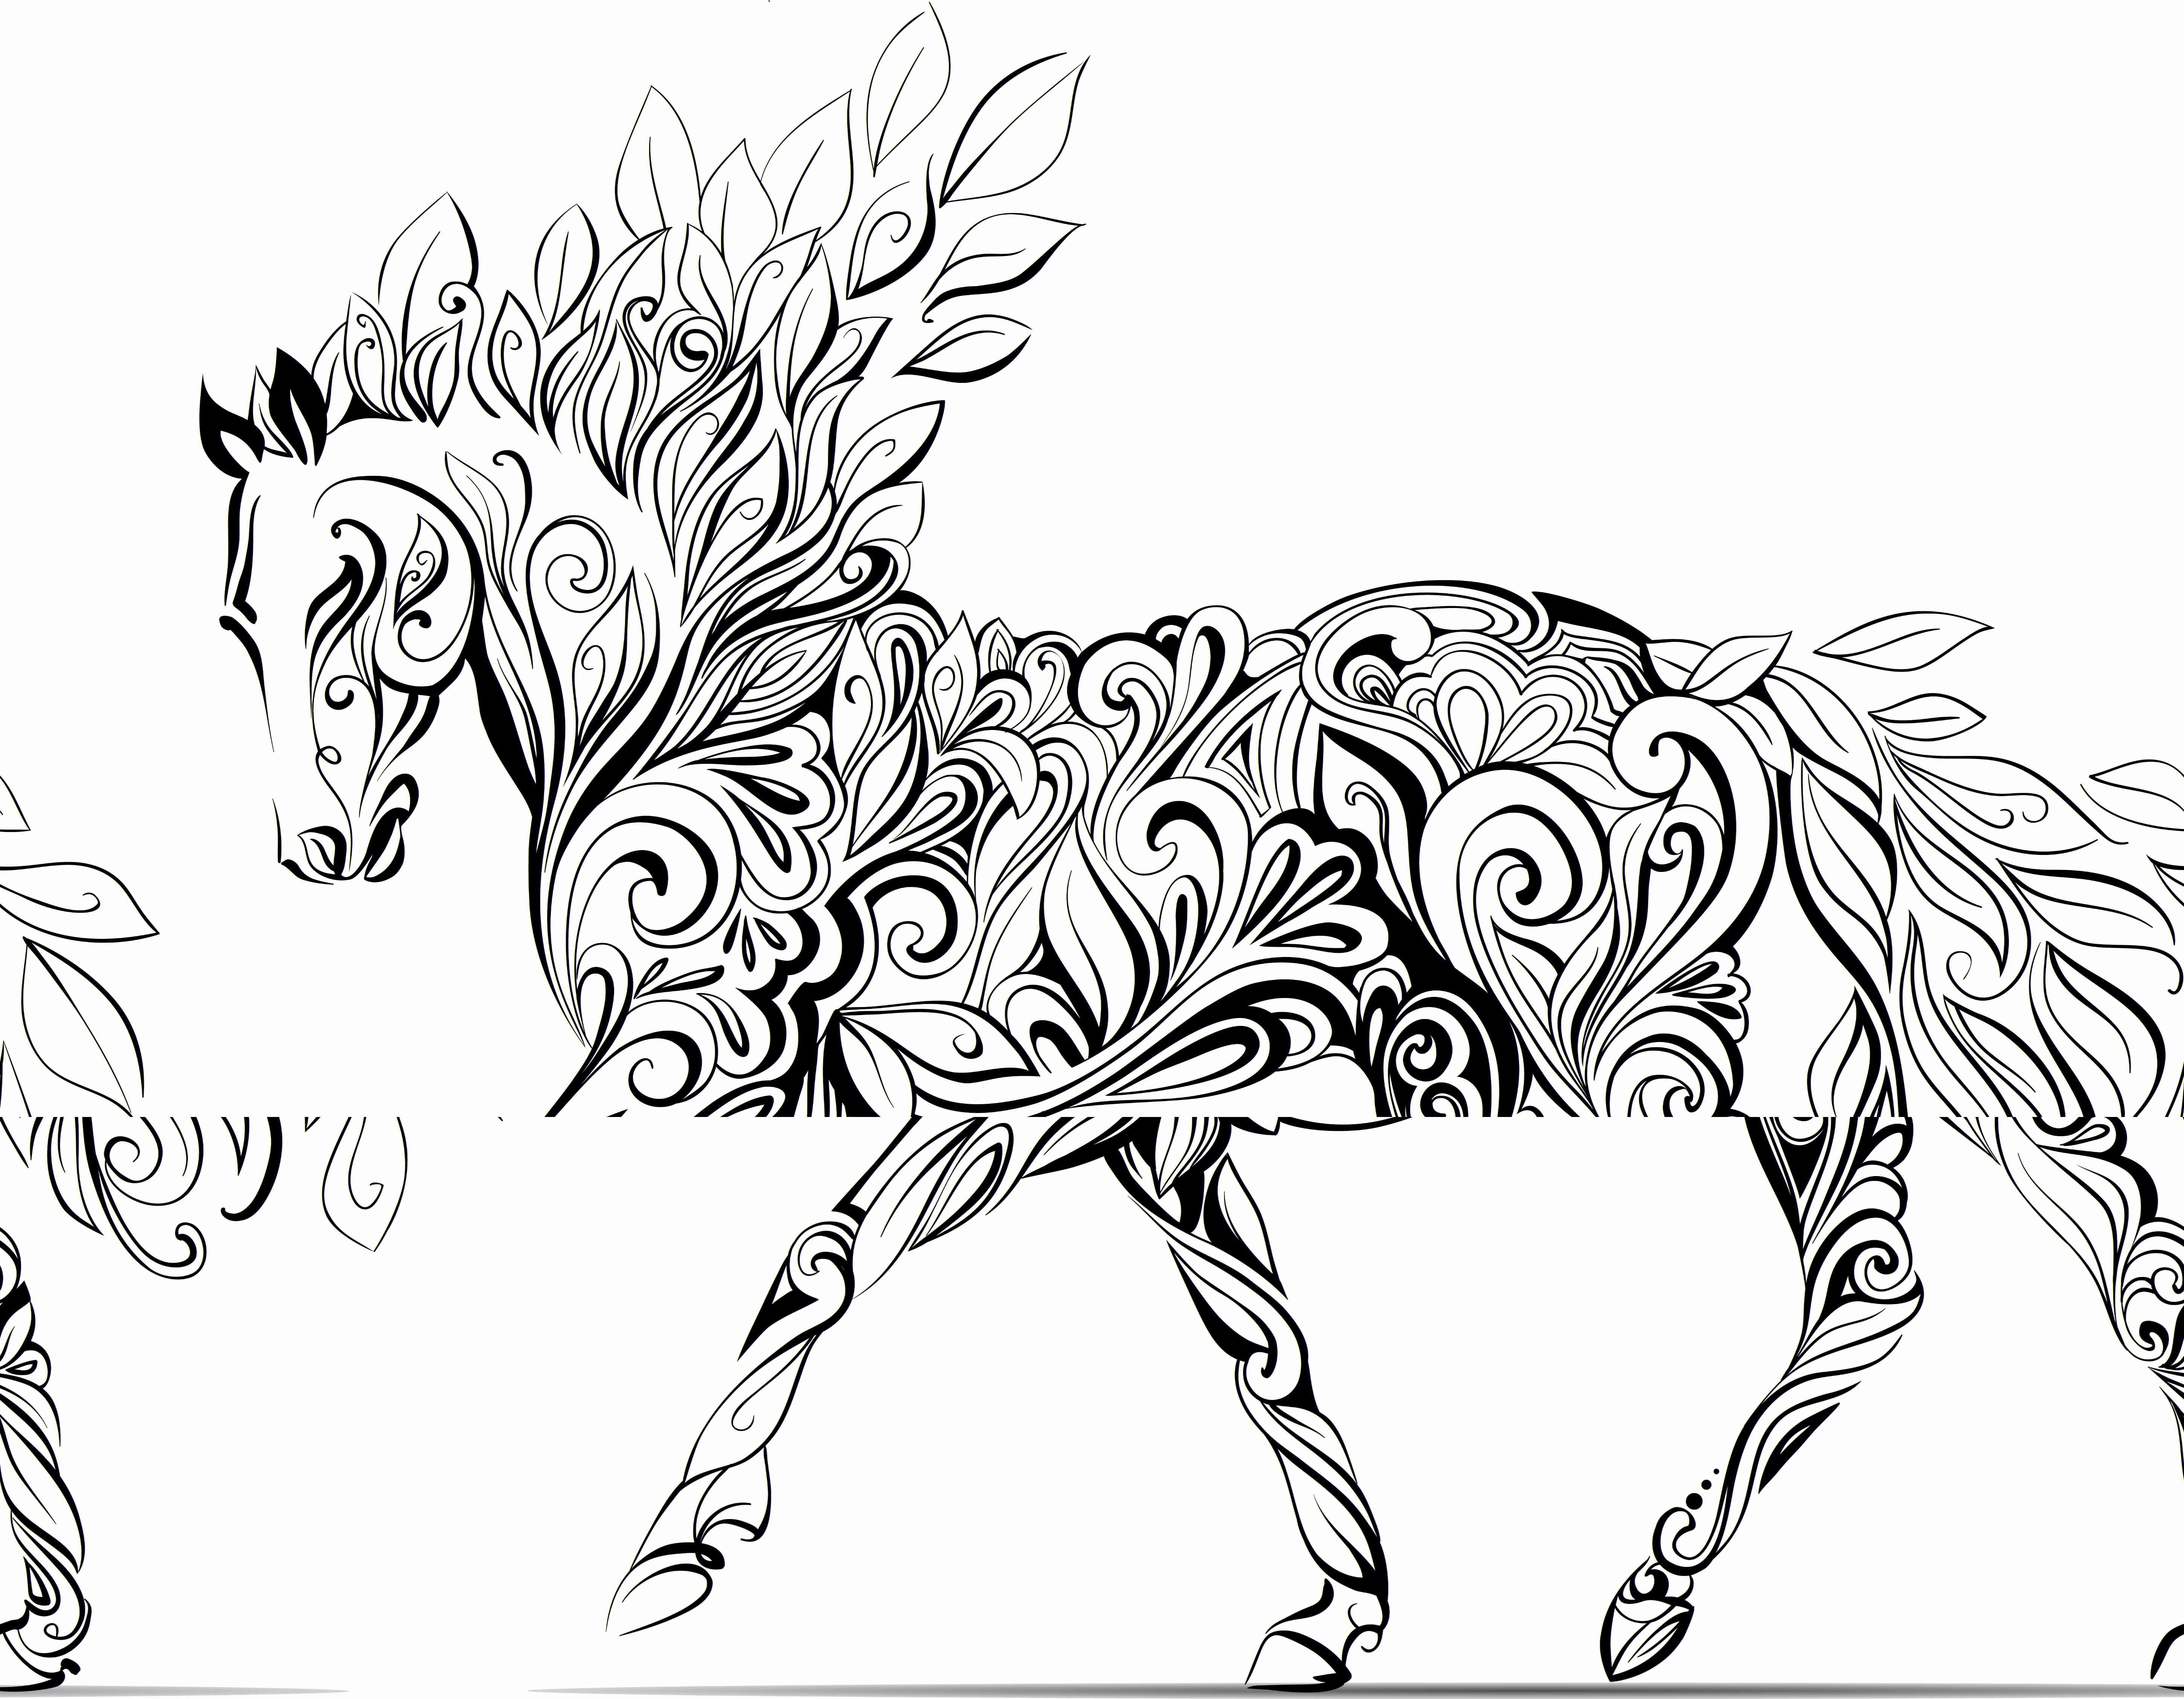 Unicorn Pictures to Colour In - BubaKids.com